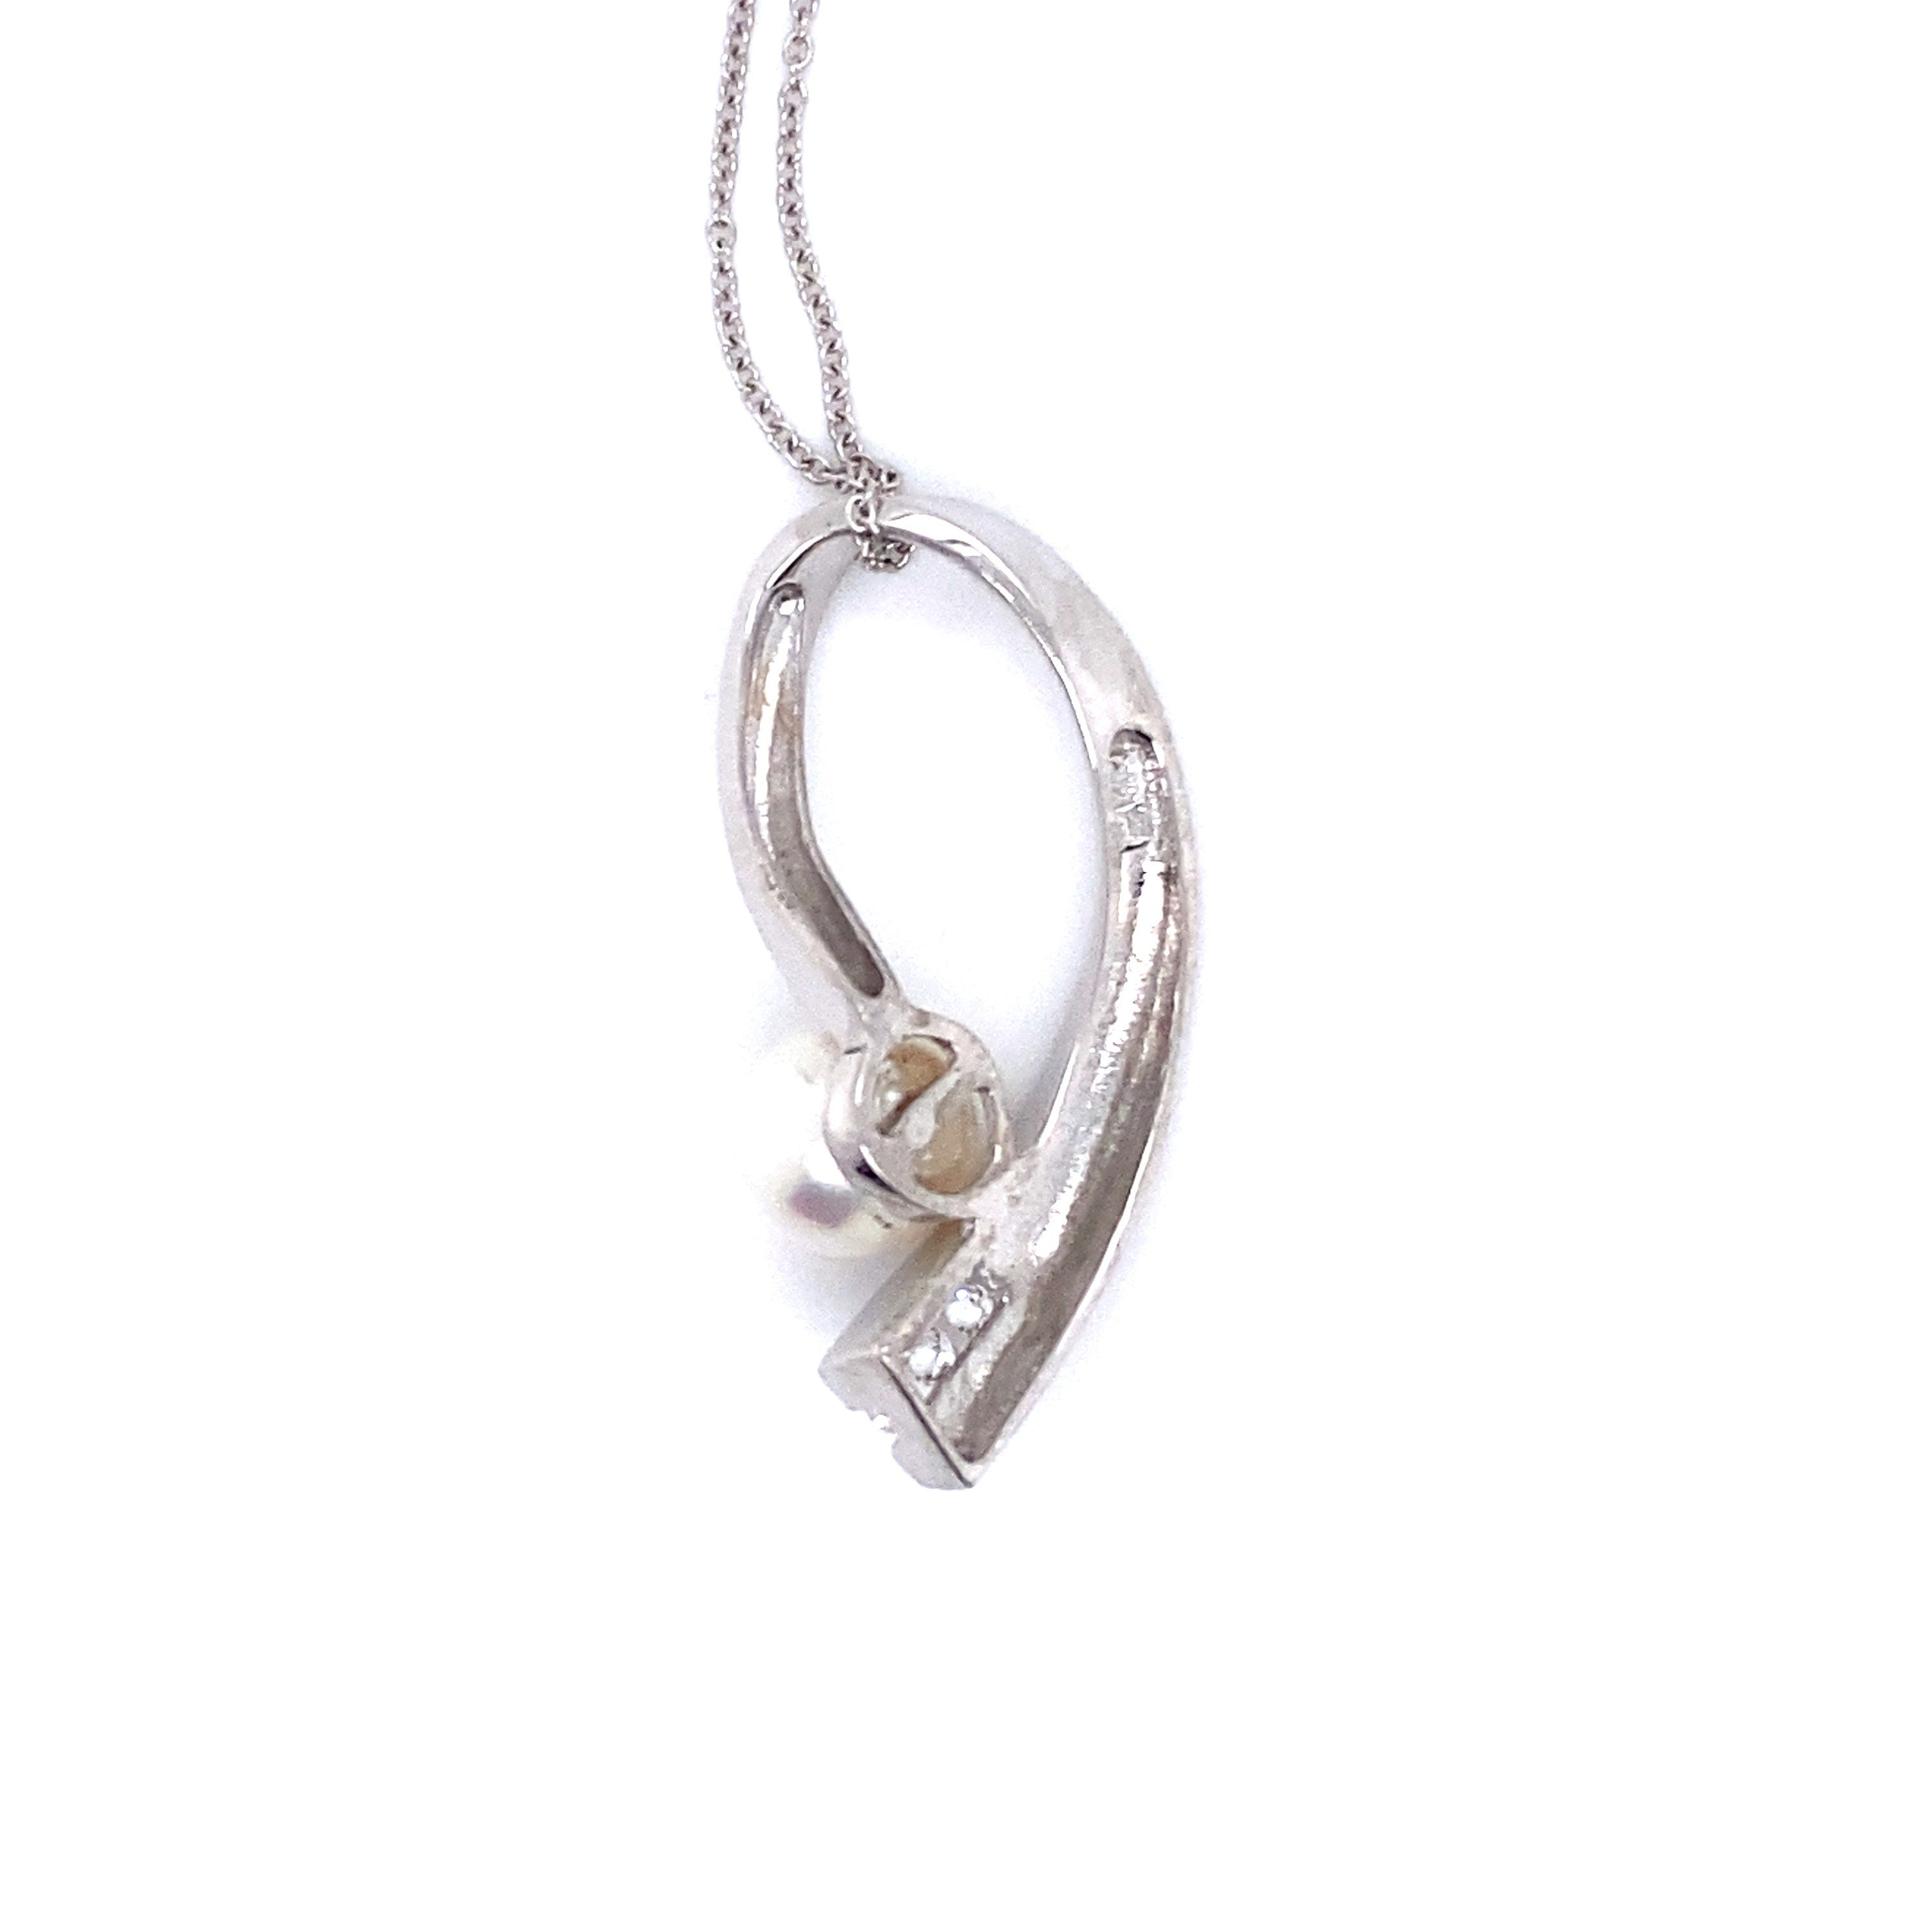 Vintage 14K White Gold Diamond and Pearl Abstract Pendant with Chain.